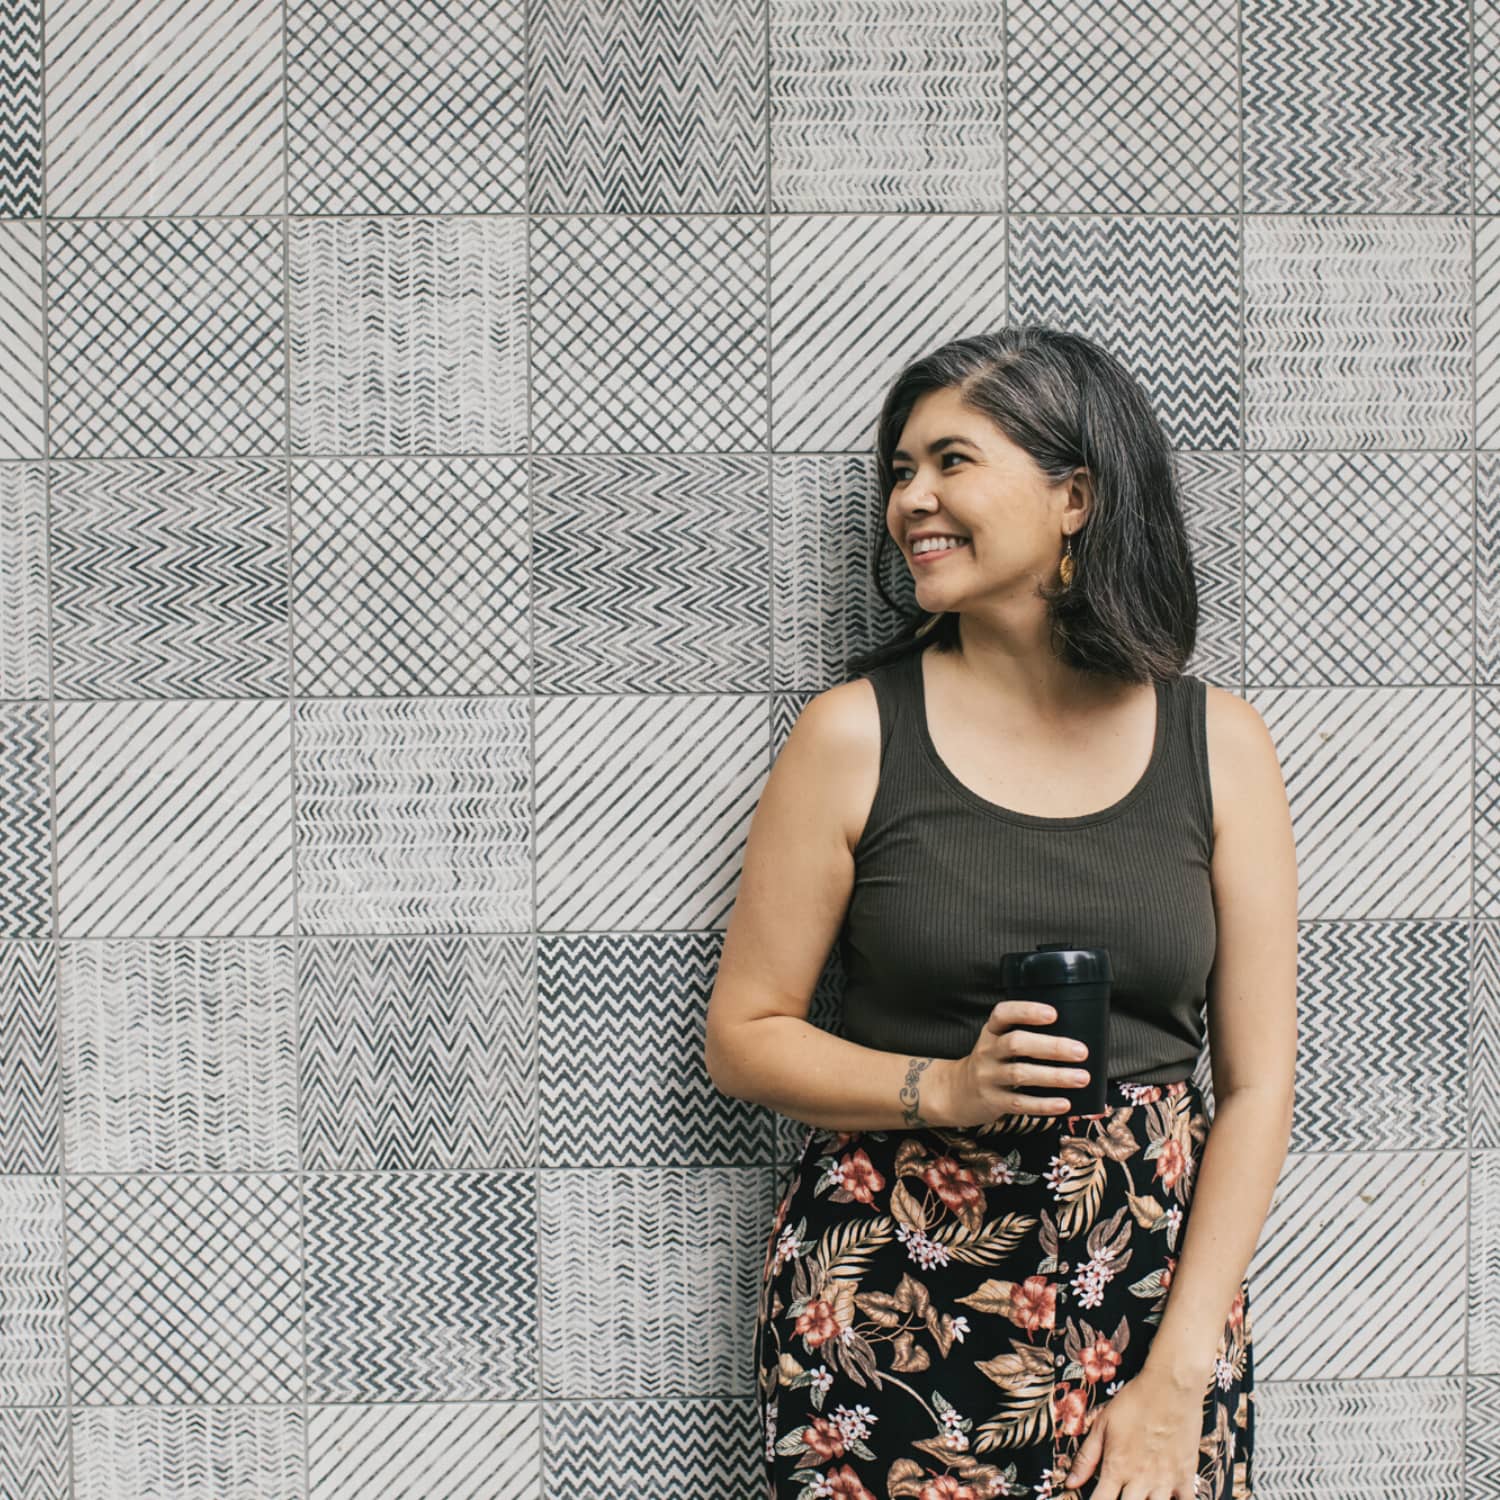 A smiling woman wearing a black tank top and floral skirt standing in front of a grey and white patterned wall.